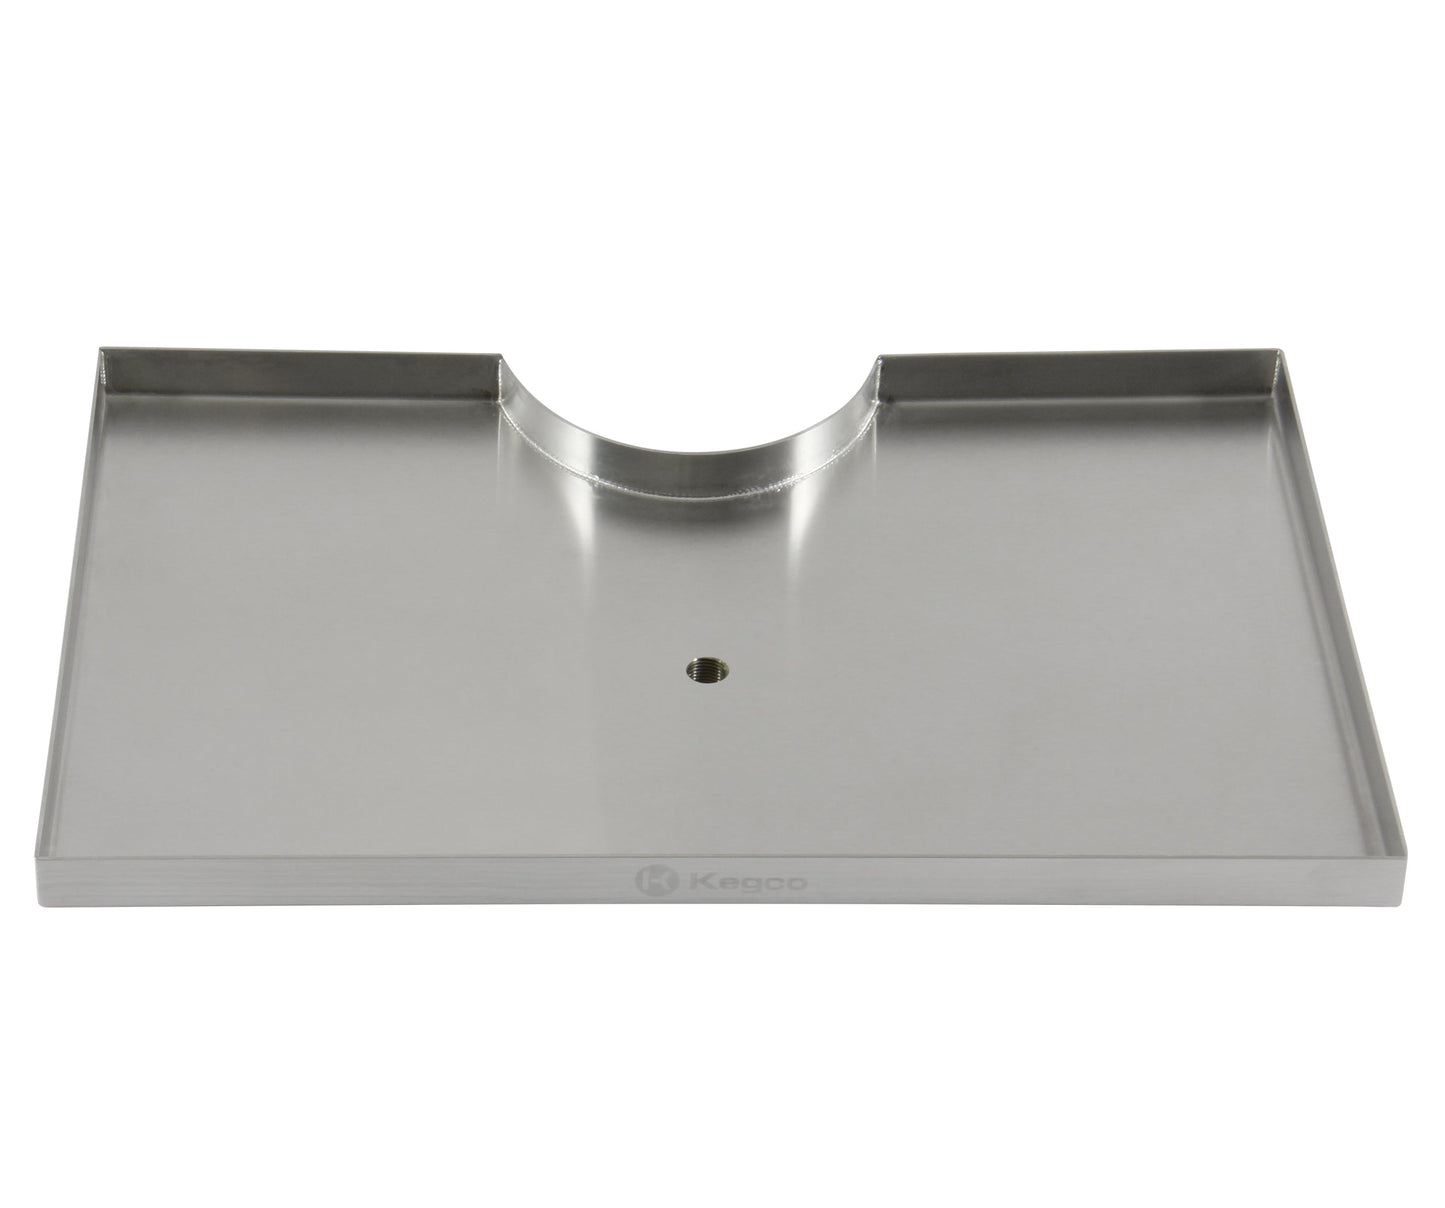 Kegco 16" x 10" Surface Mount Drip Tray 3" Column Cut-Out with Drain